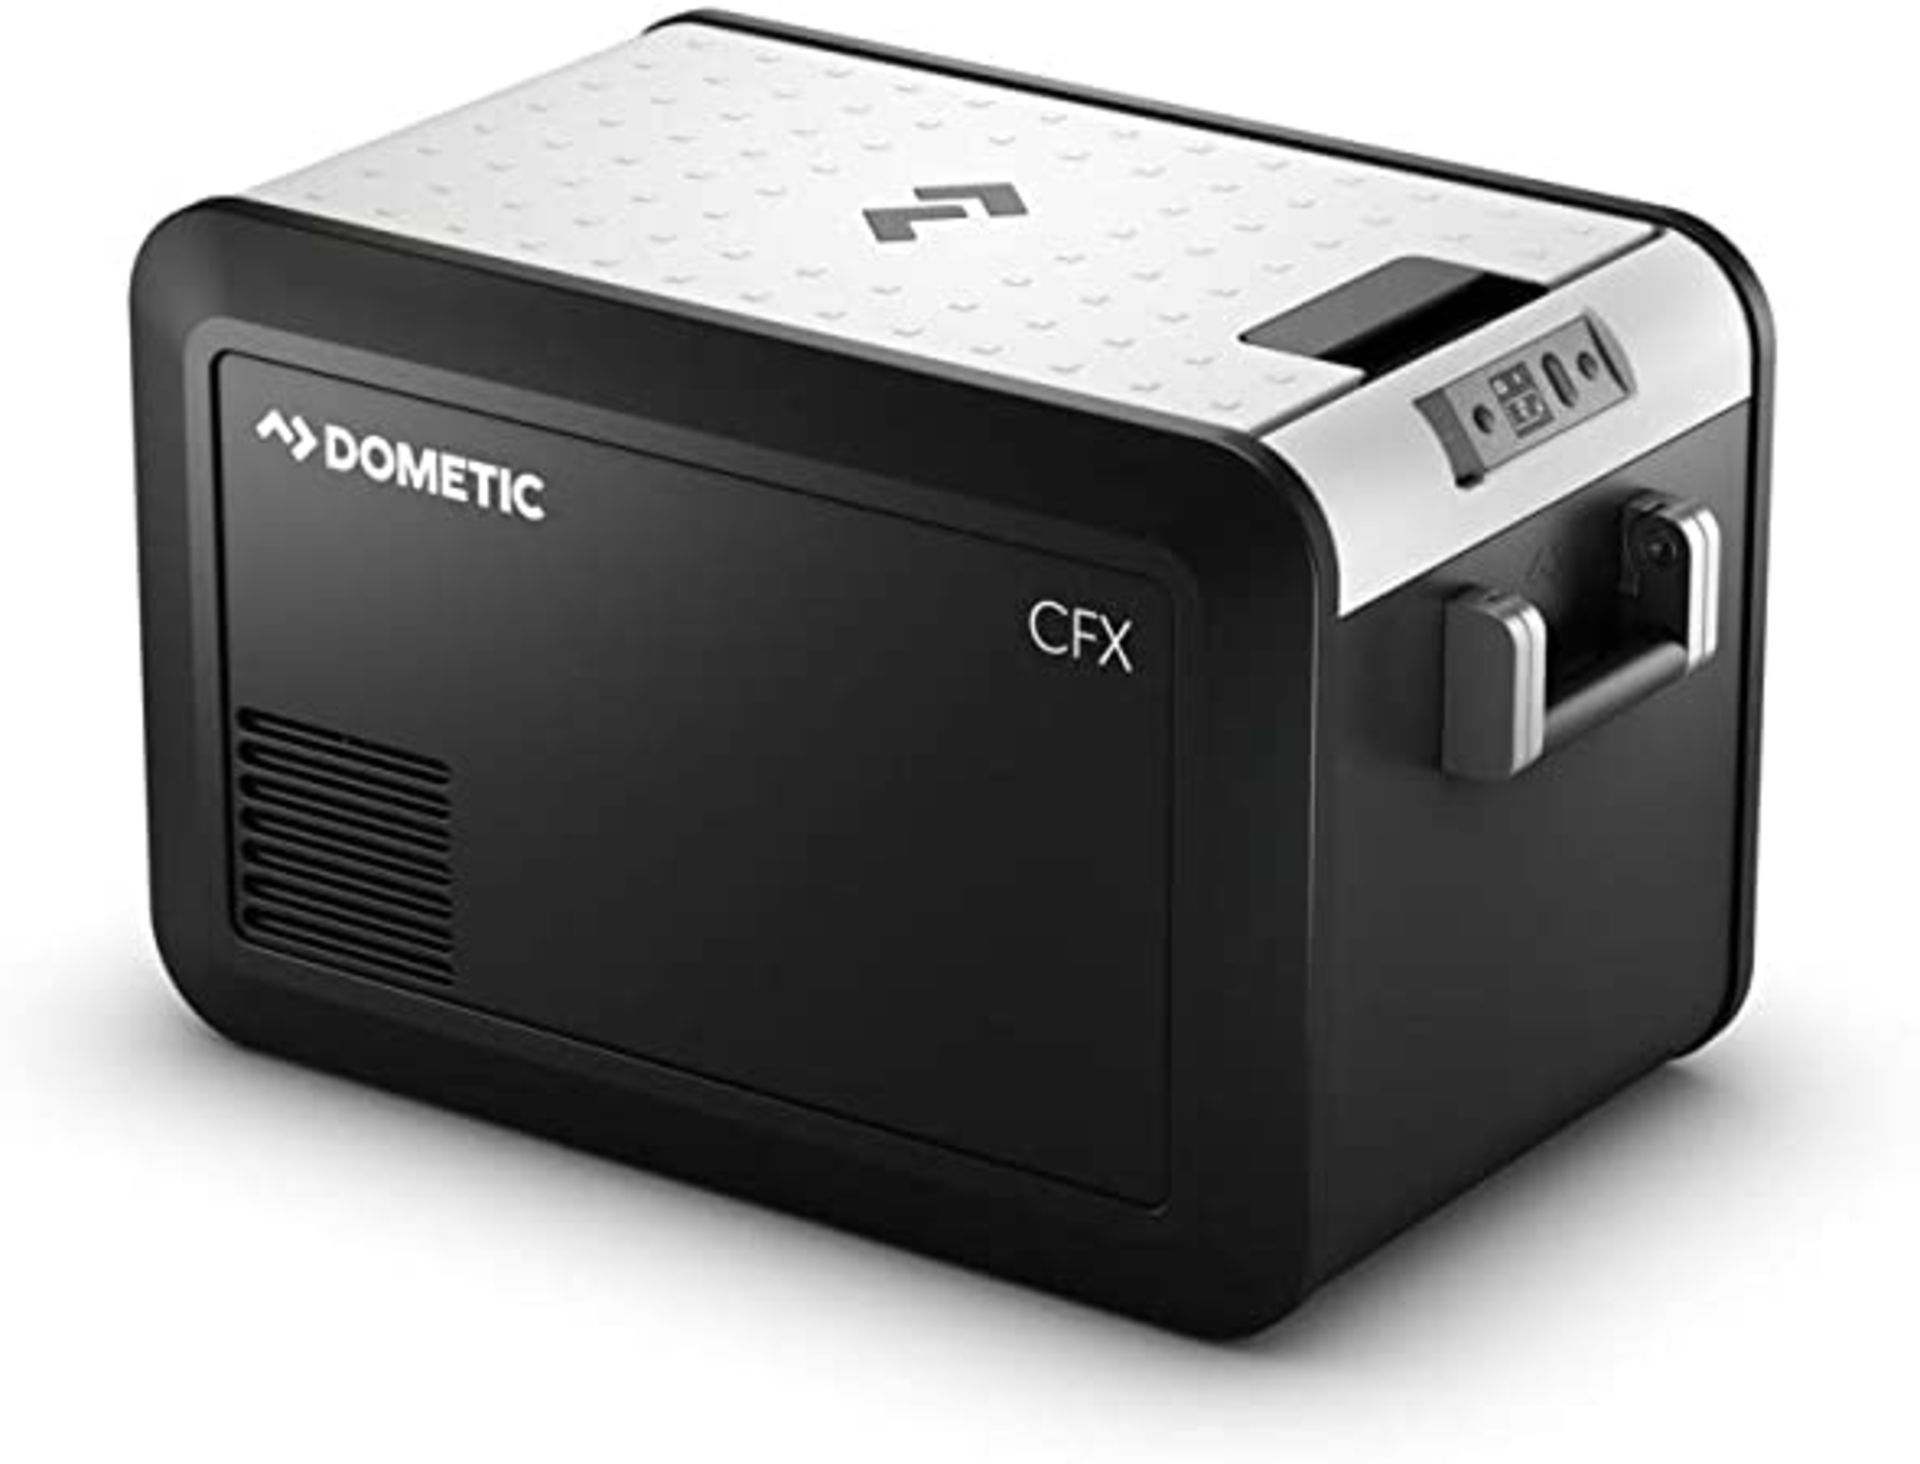 1 x Dometic CFX3 35 Portable 32l Compressor Cooler and Freezer - Features Bluetooth and WiFi - Image 2 of 3